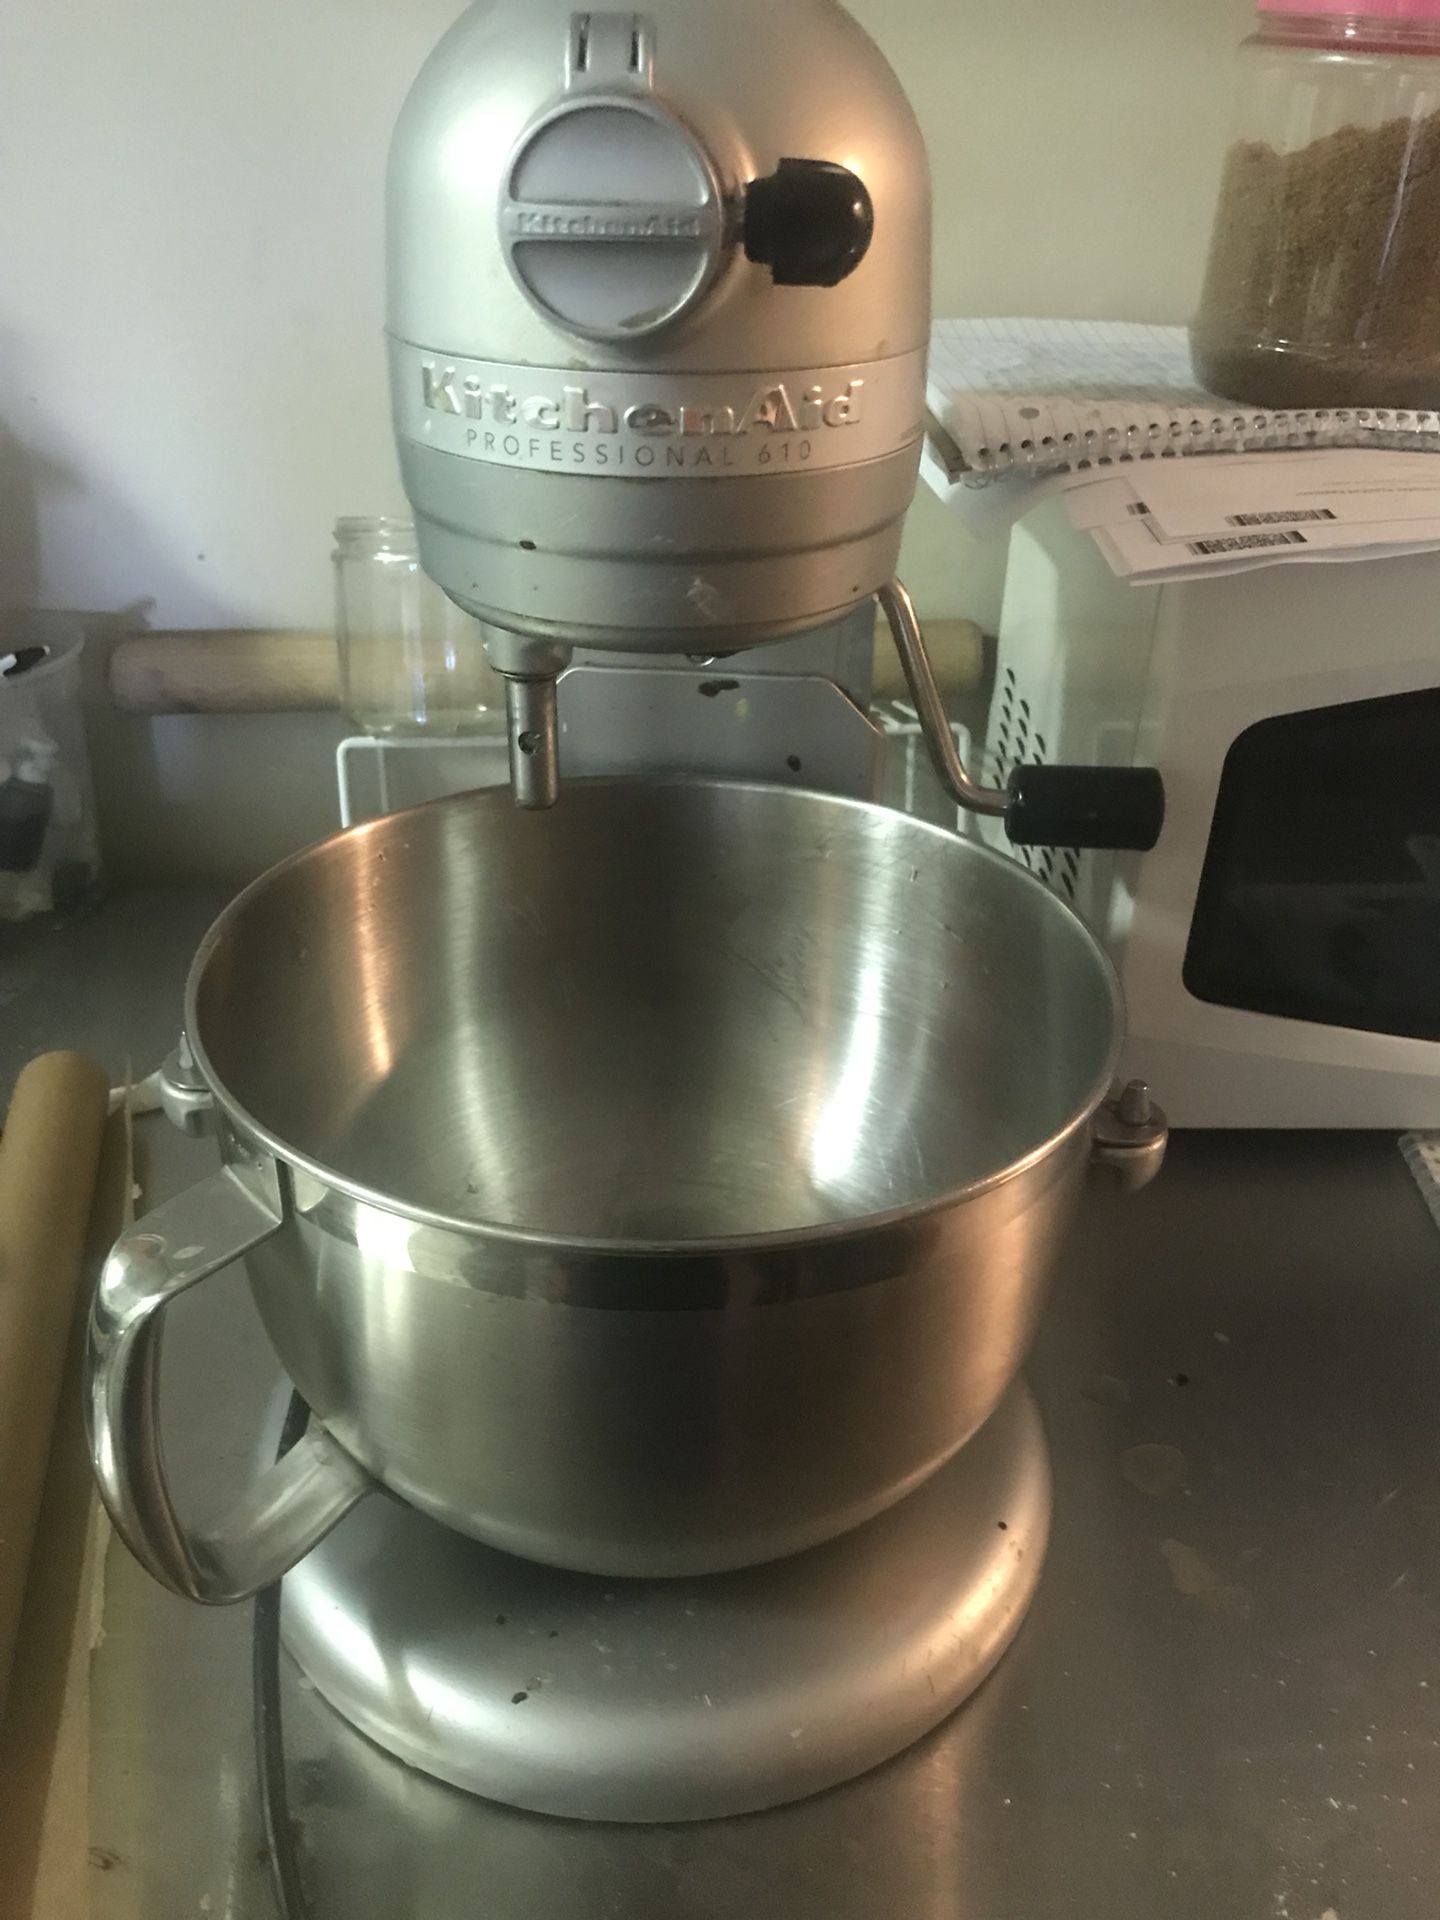 Kitchen aid professional stand mixer 610 series